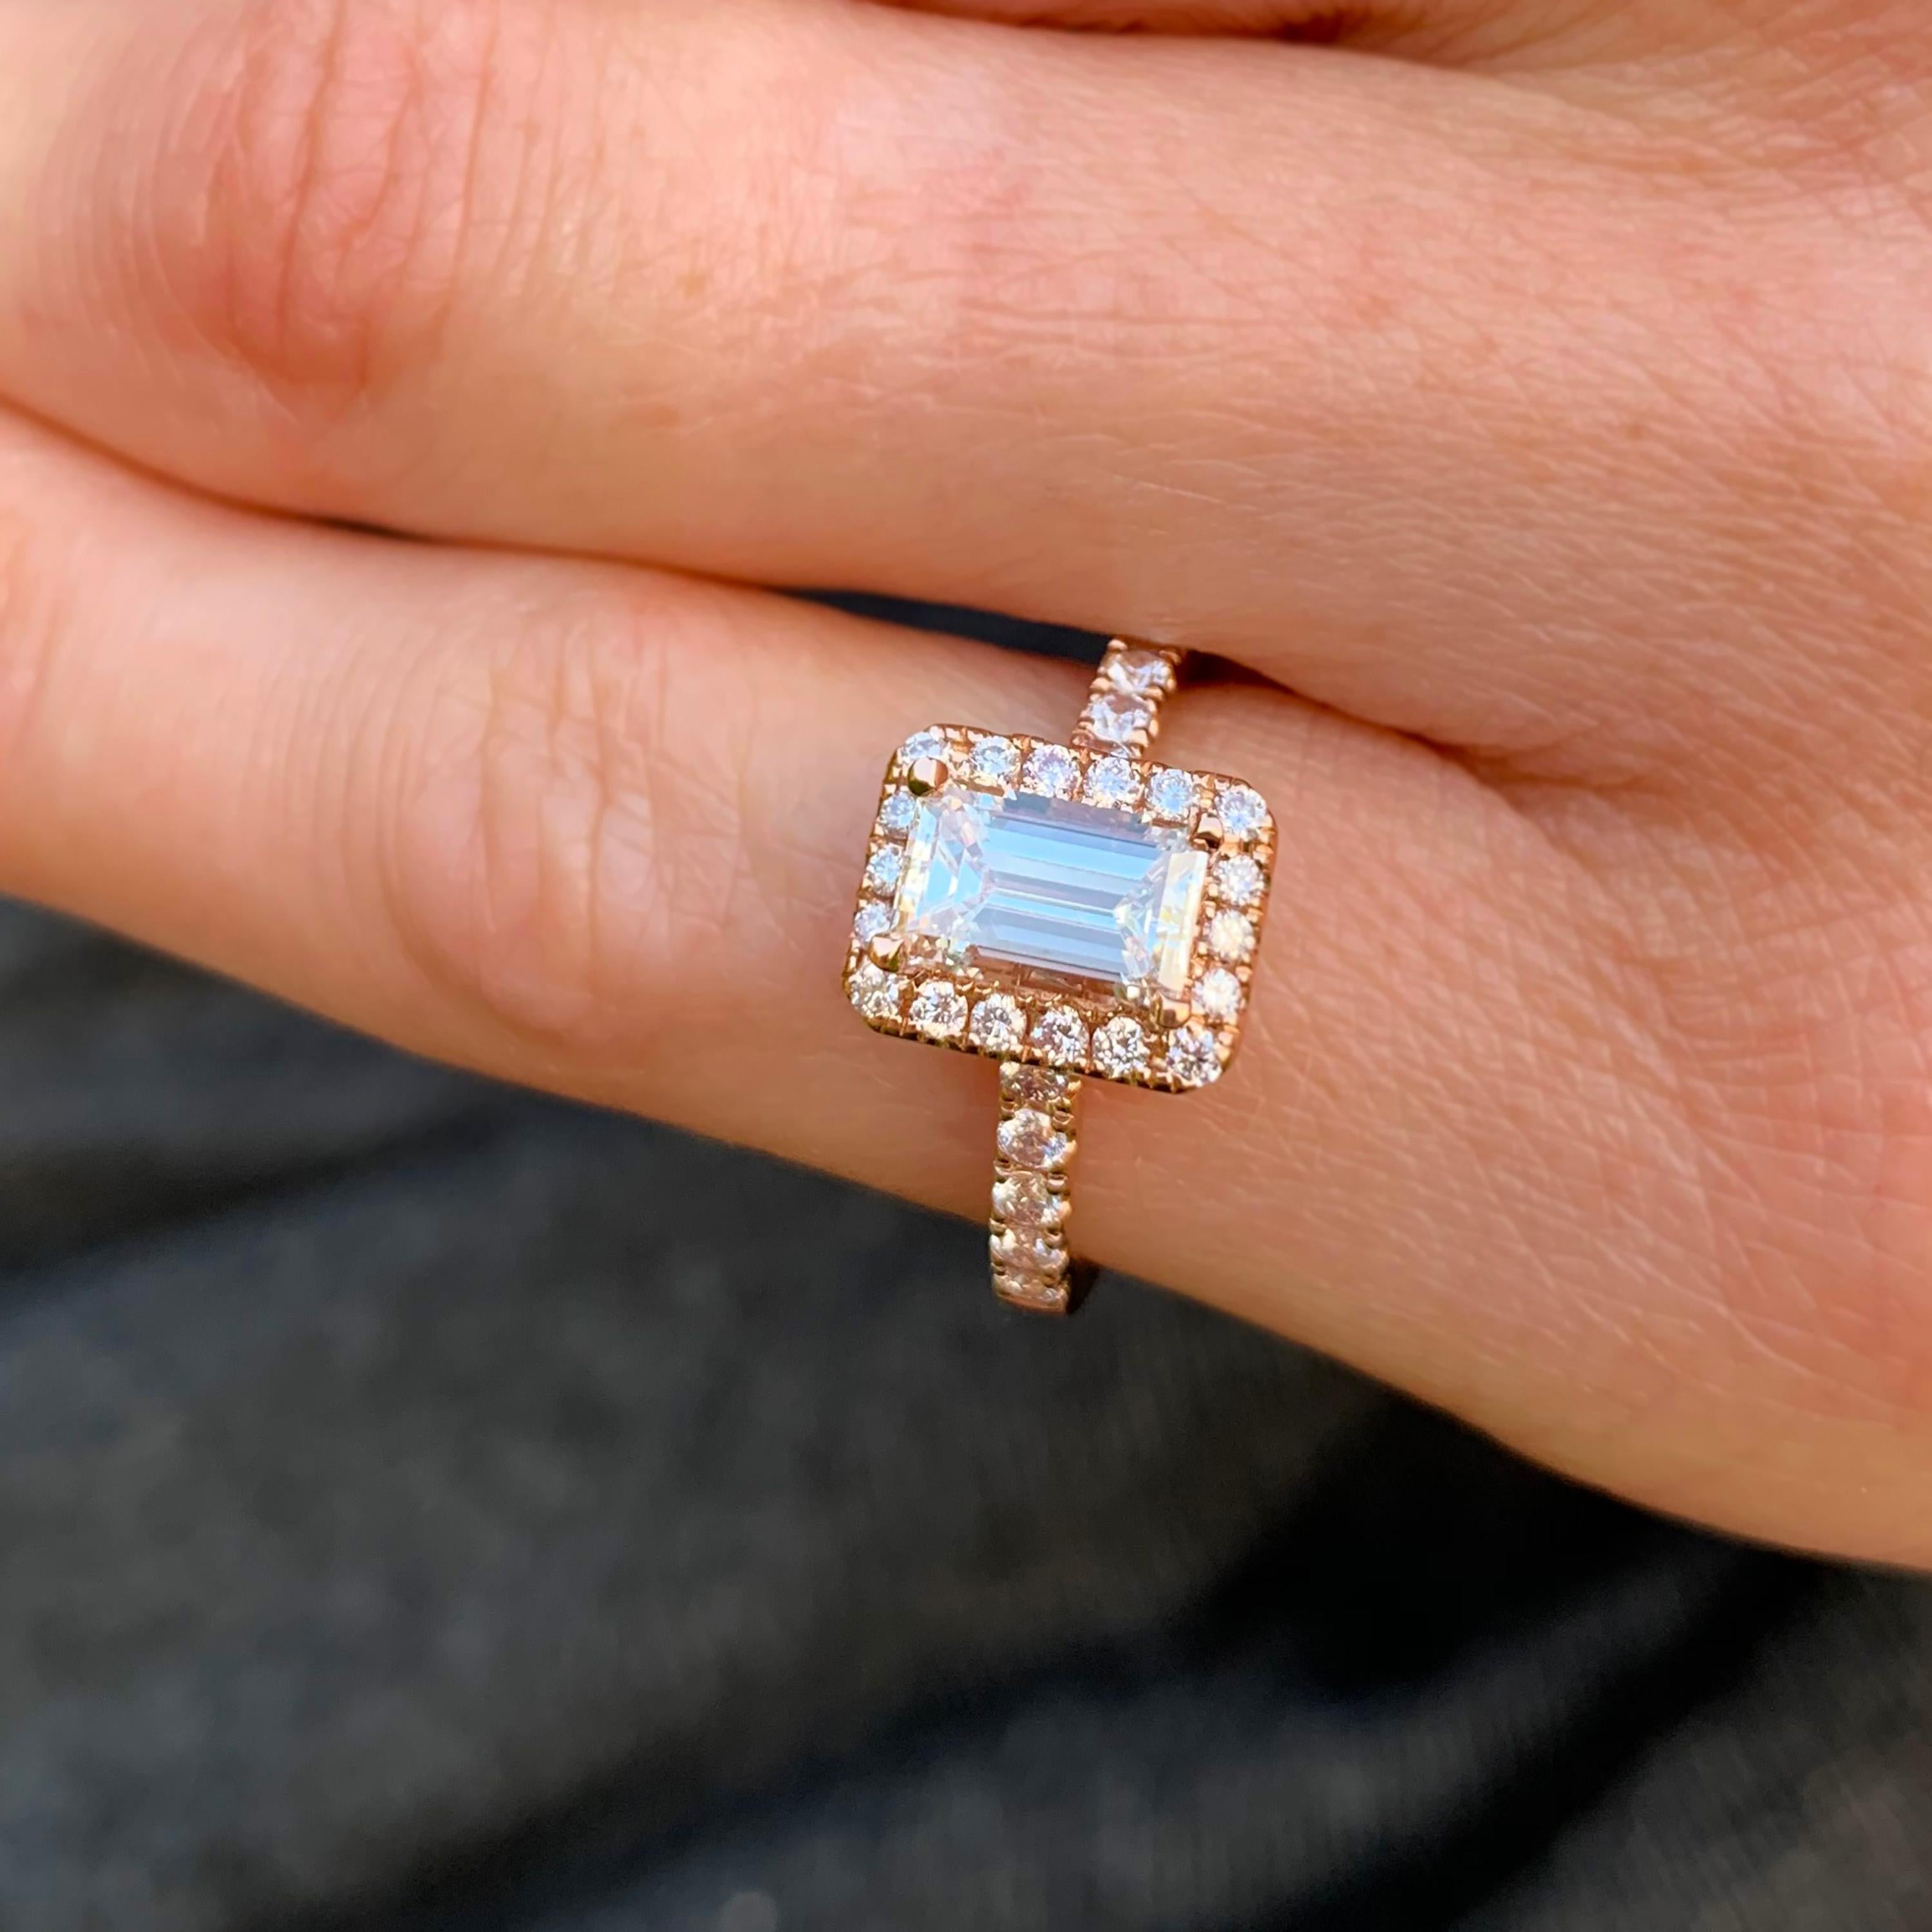 A classic but totally unique engagement ring by Ronan Campbell. Words do not do this piece justice. A breathtaking emerald cut diamond (0.90ct GIA F VS2) is surrounded by exquisitely matched pink diamonds (0.45ct) all wrapped up in warm rose